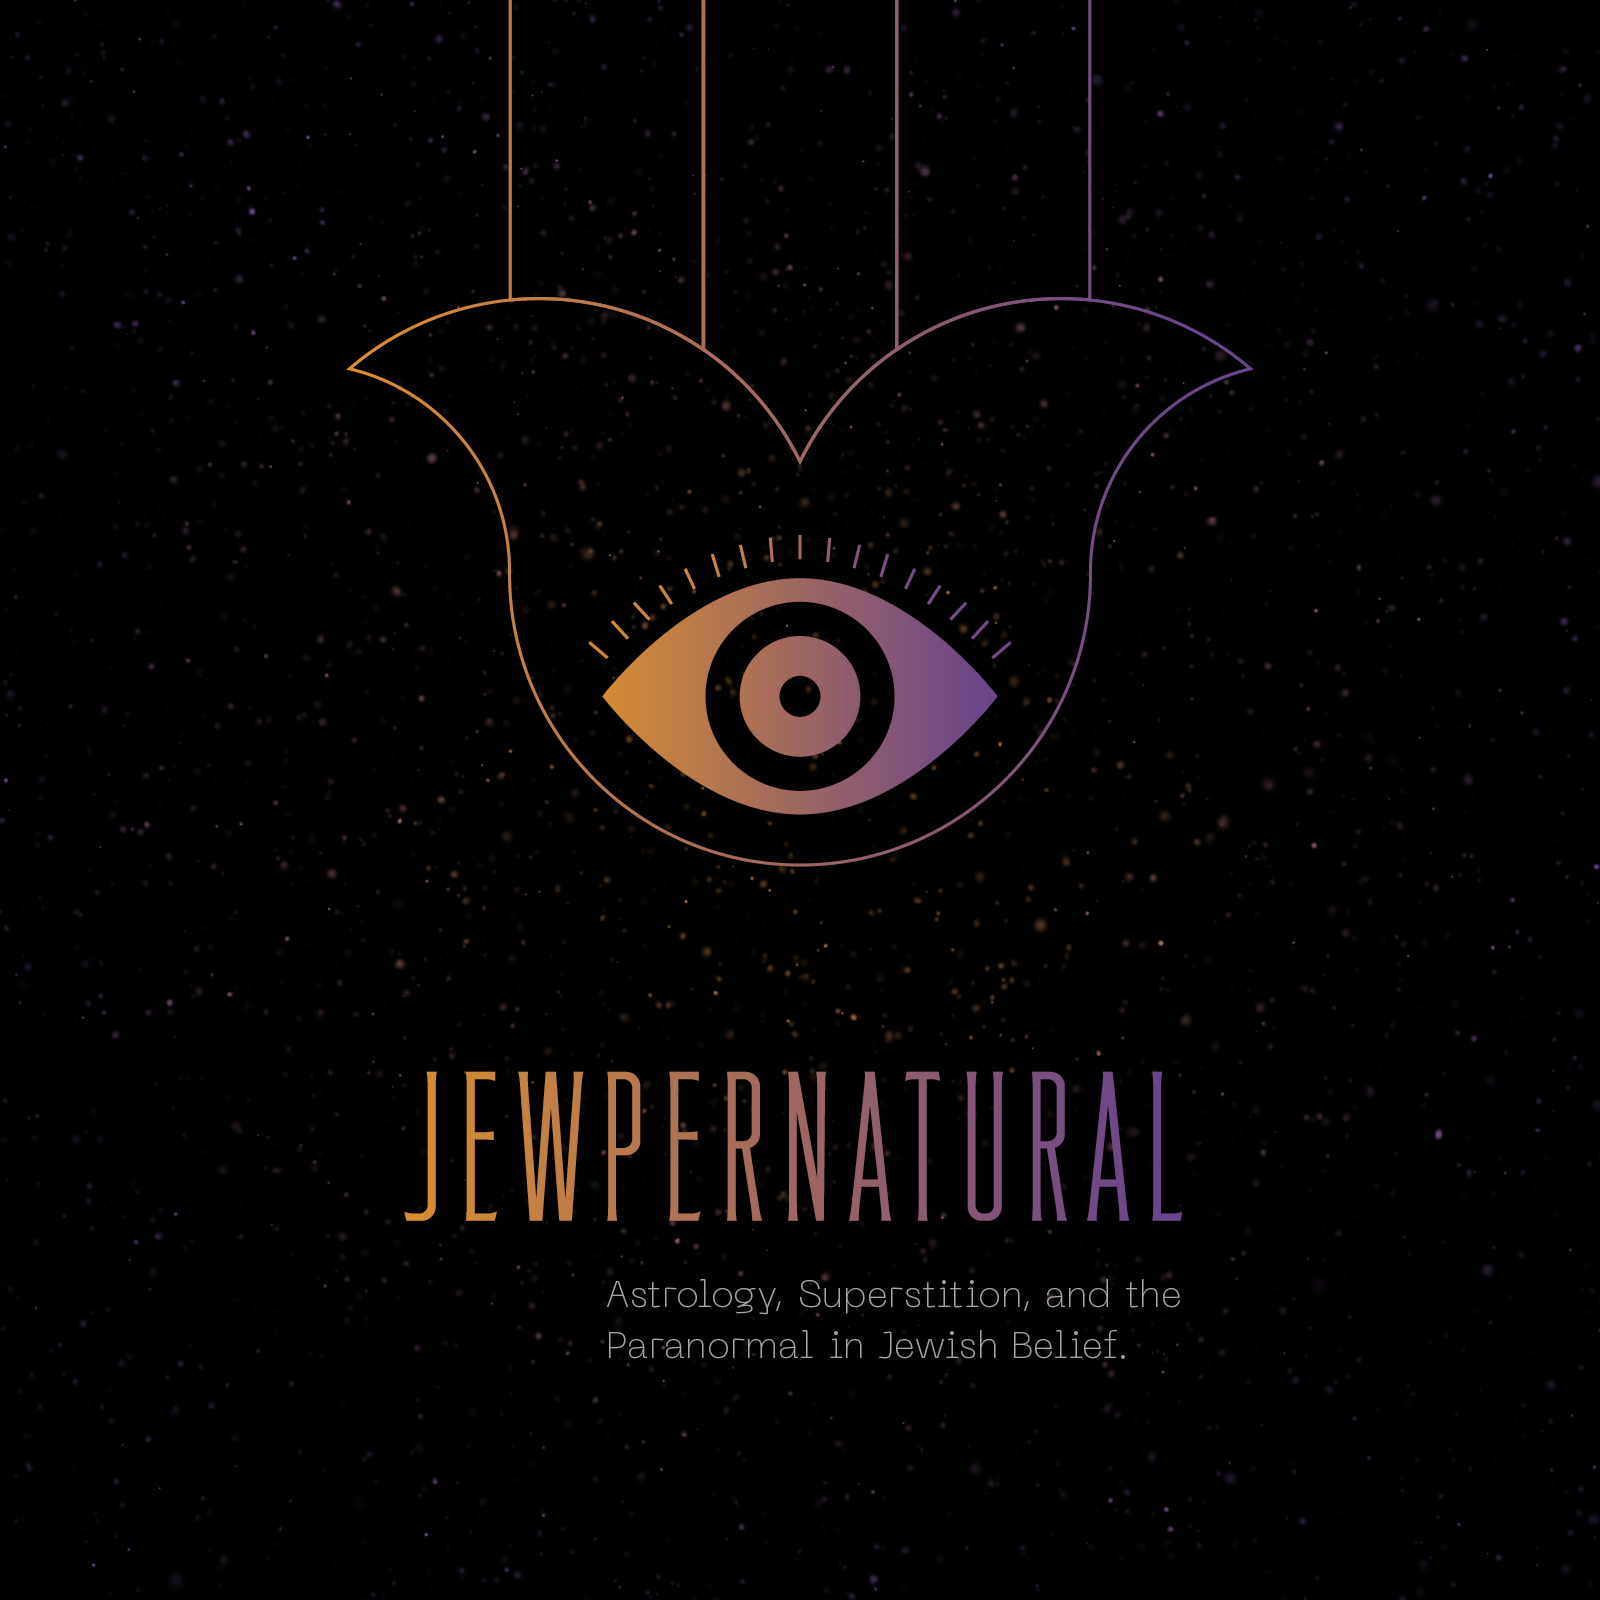 Jewpernatural: Signs, spirits and superstition in Jewish belief